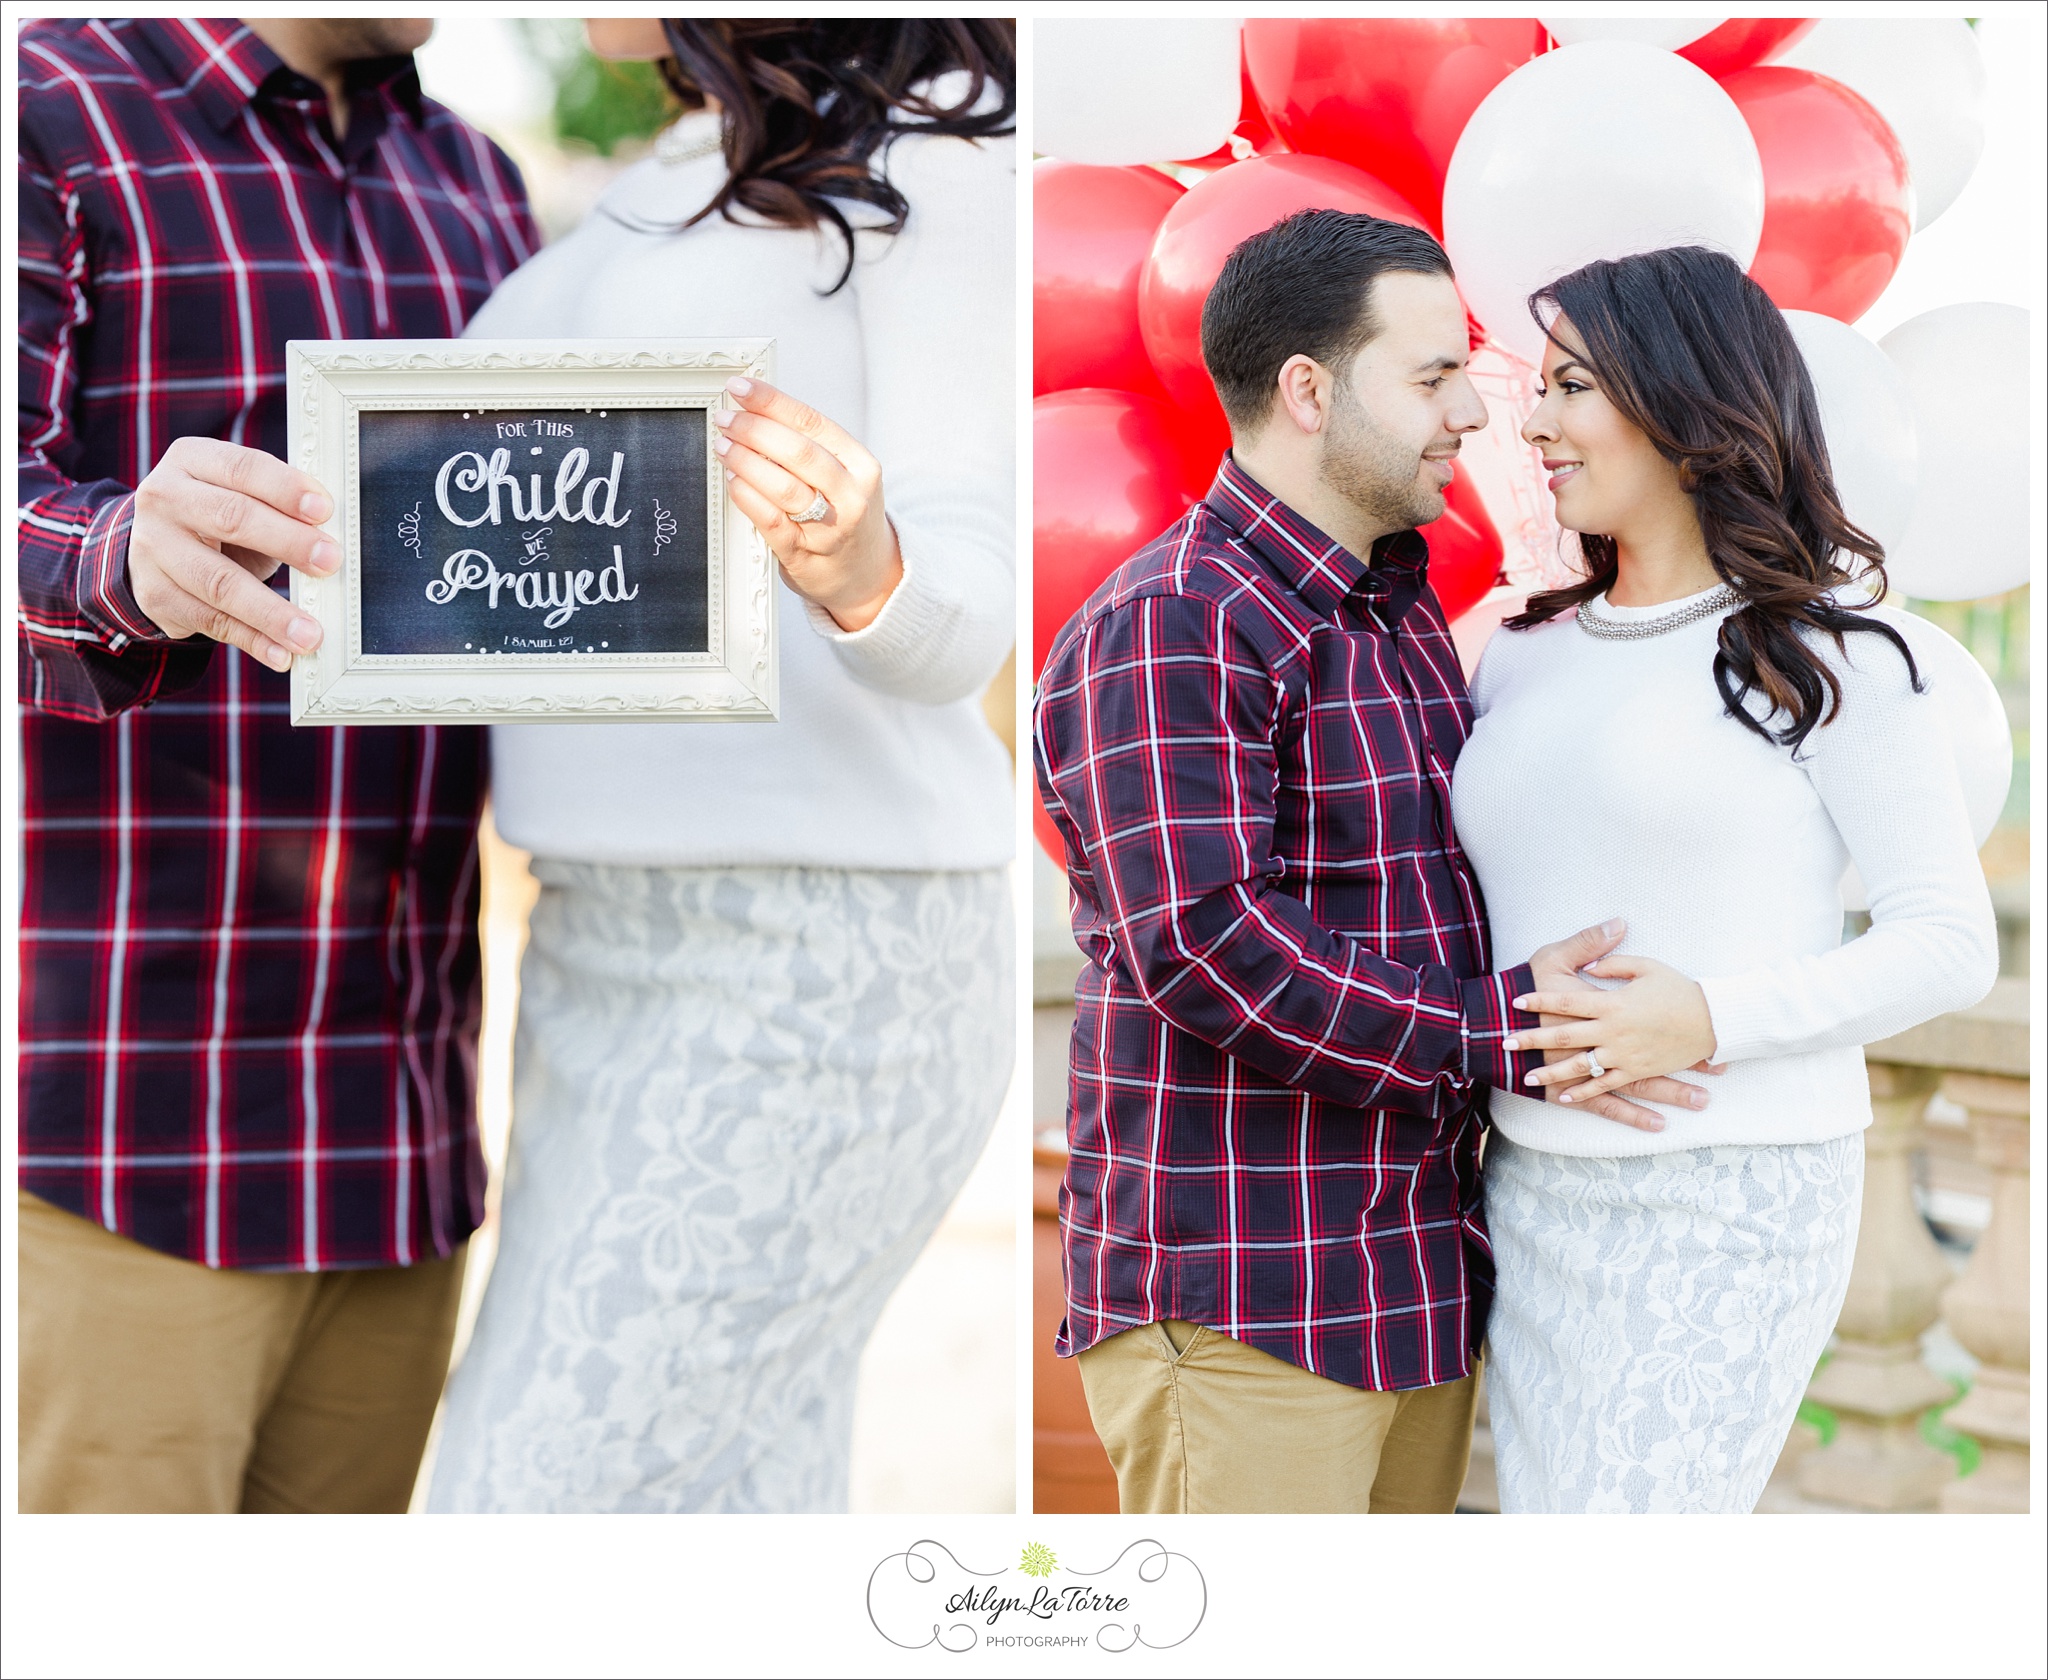 Tampa Maternity Portraits |© Ailyn La Torre Photography 2015